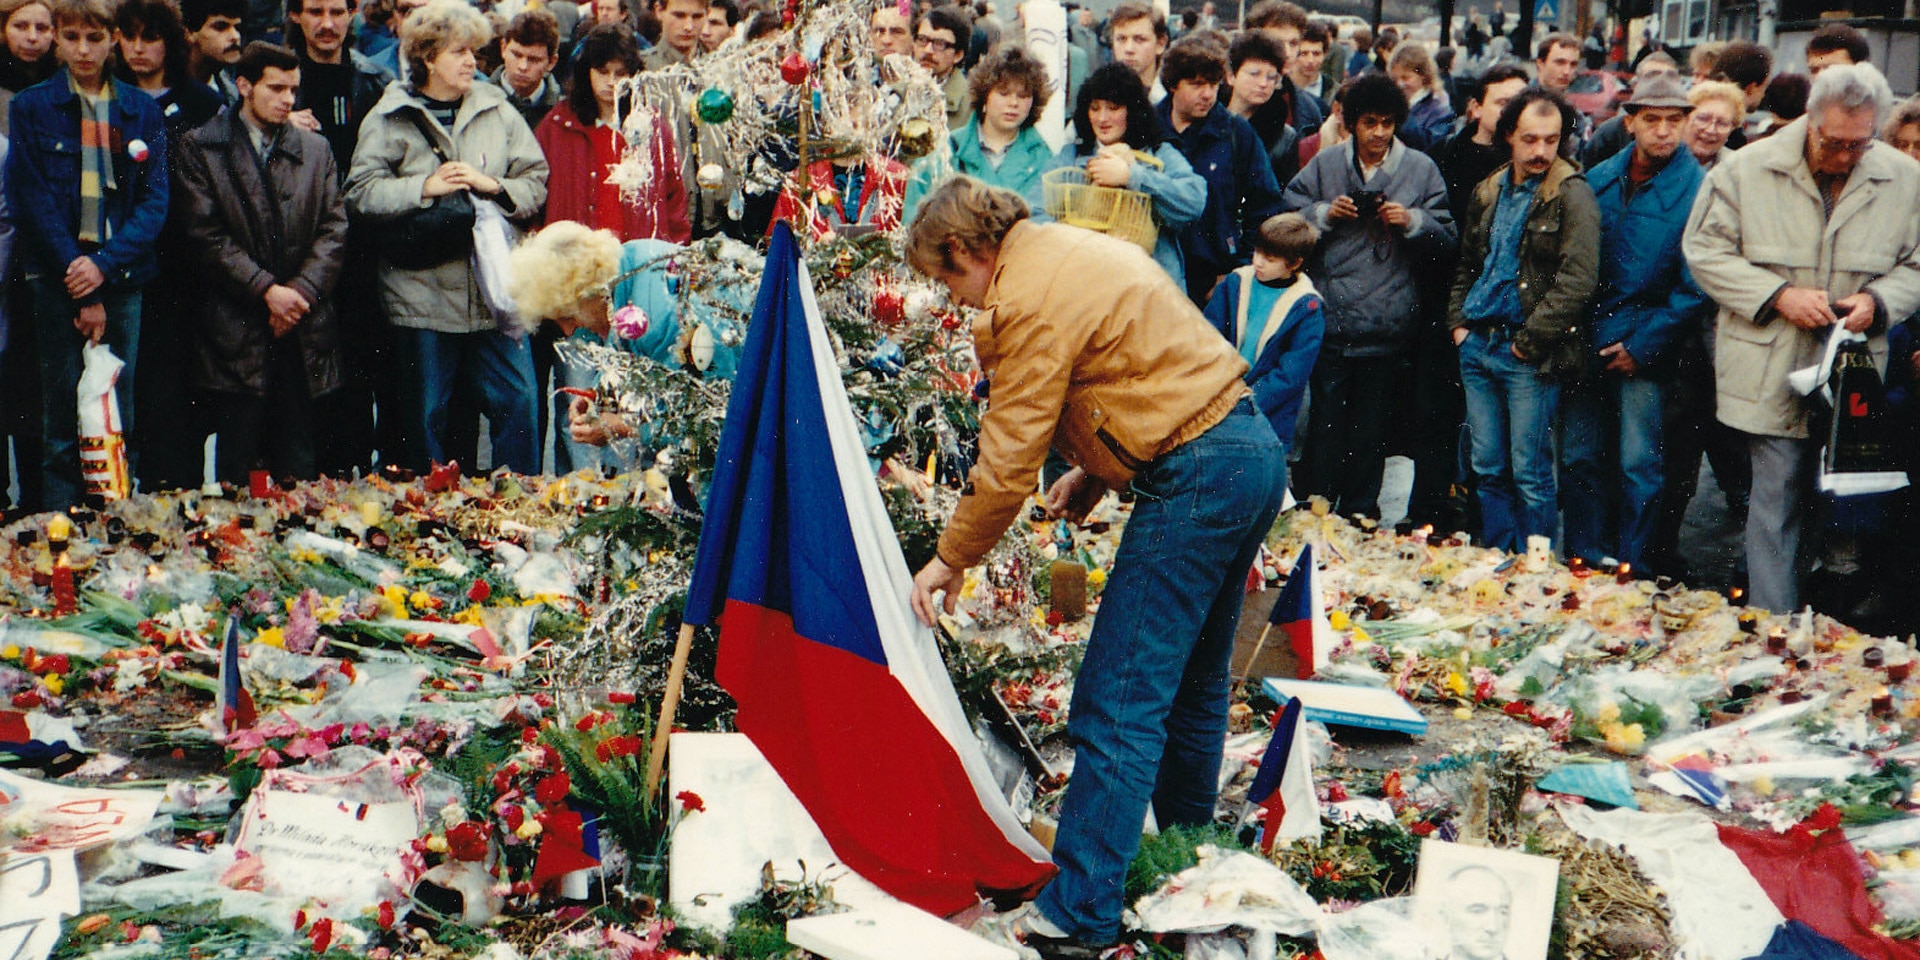 Surrounded by a crowd, Václav Havel lays flowers on Wenceslas Square.